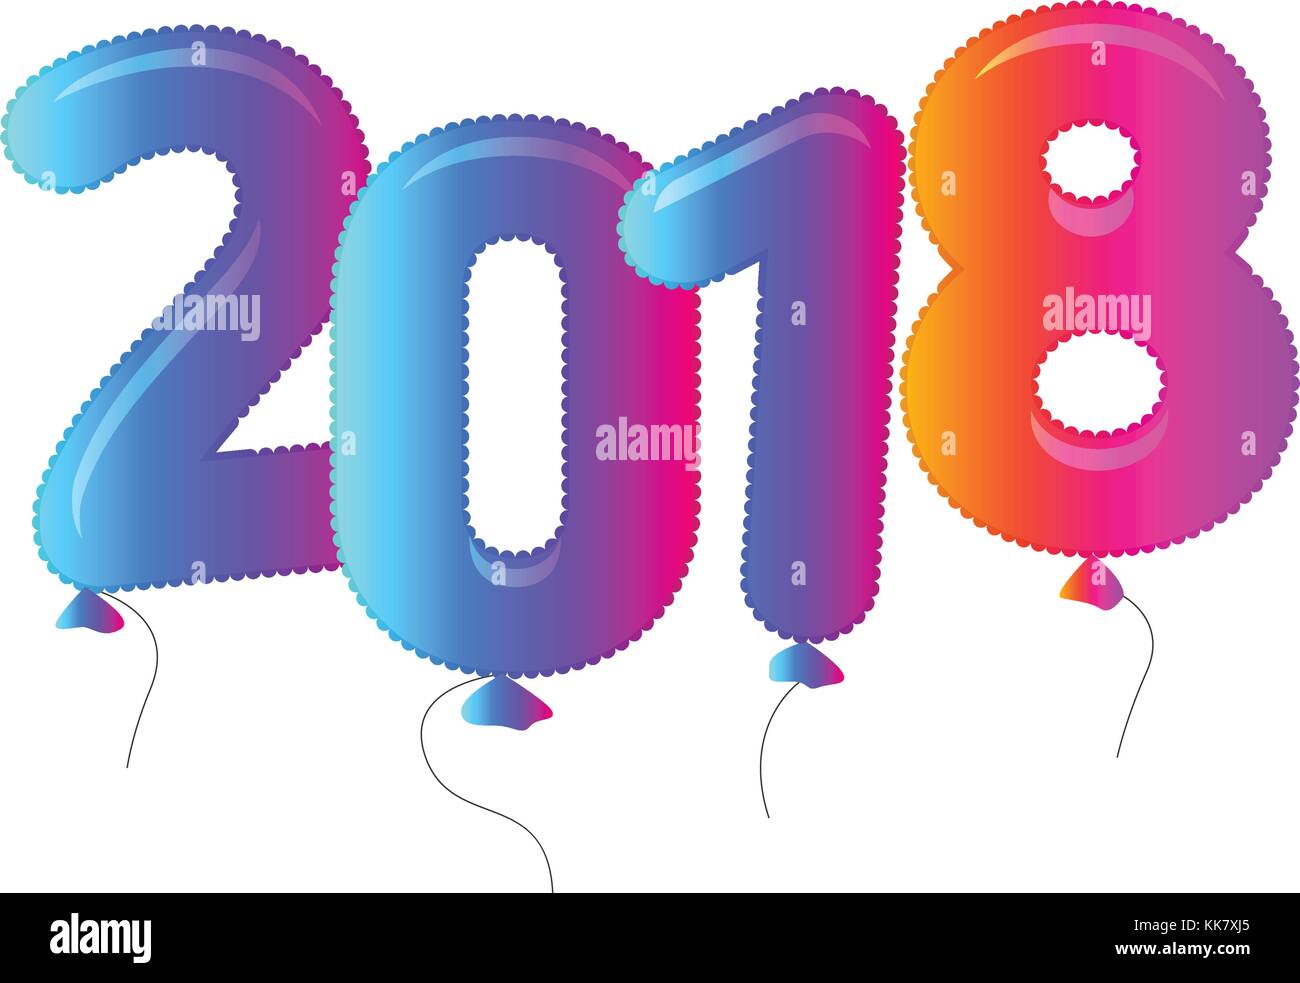 Colorful baloons, happy new year vector logo. Stock Vector